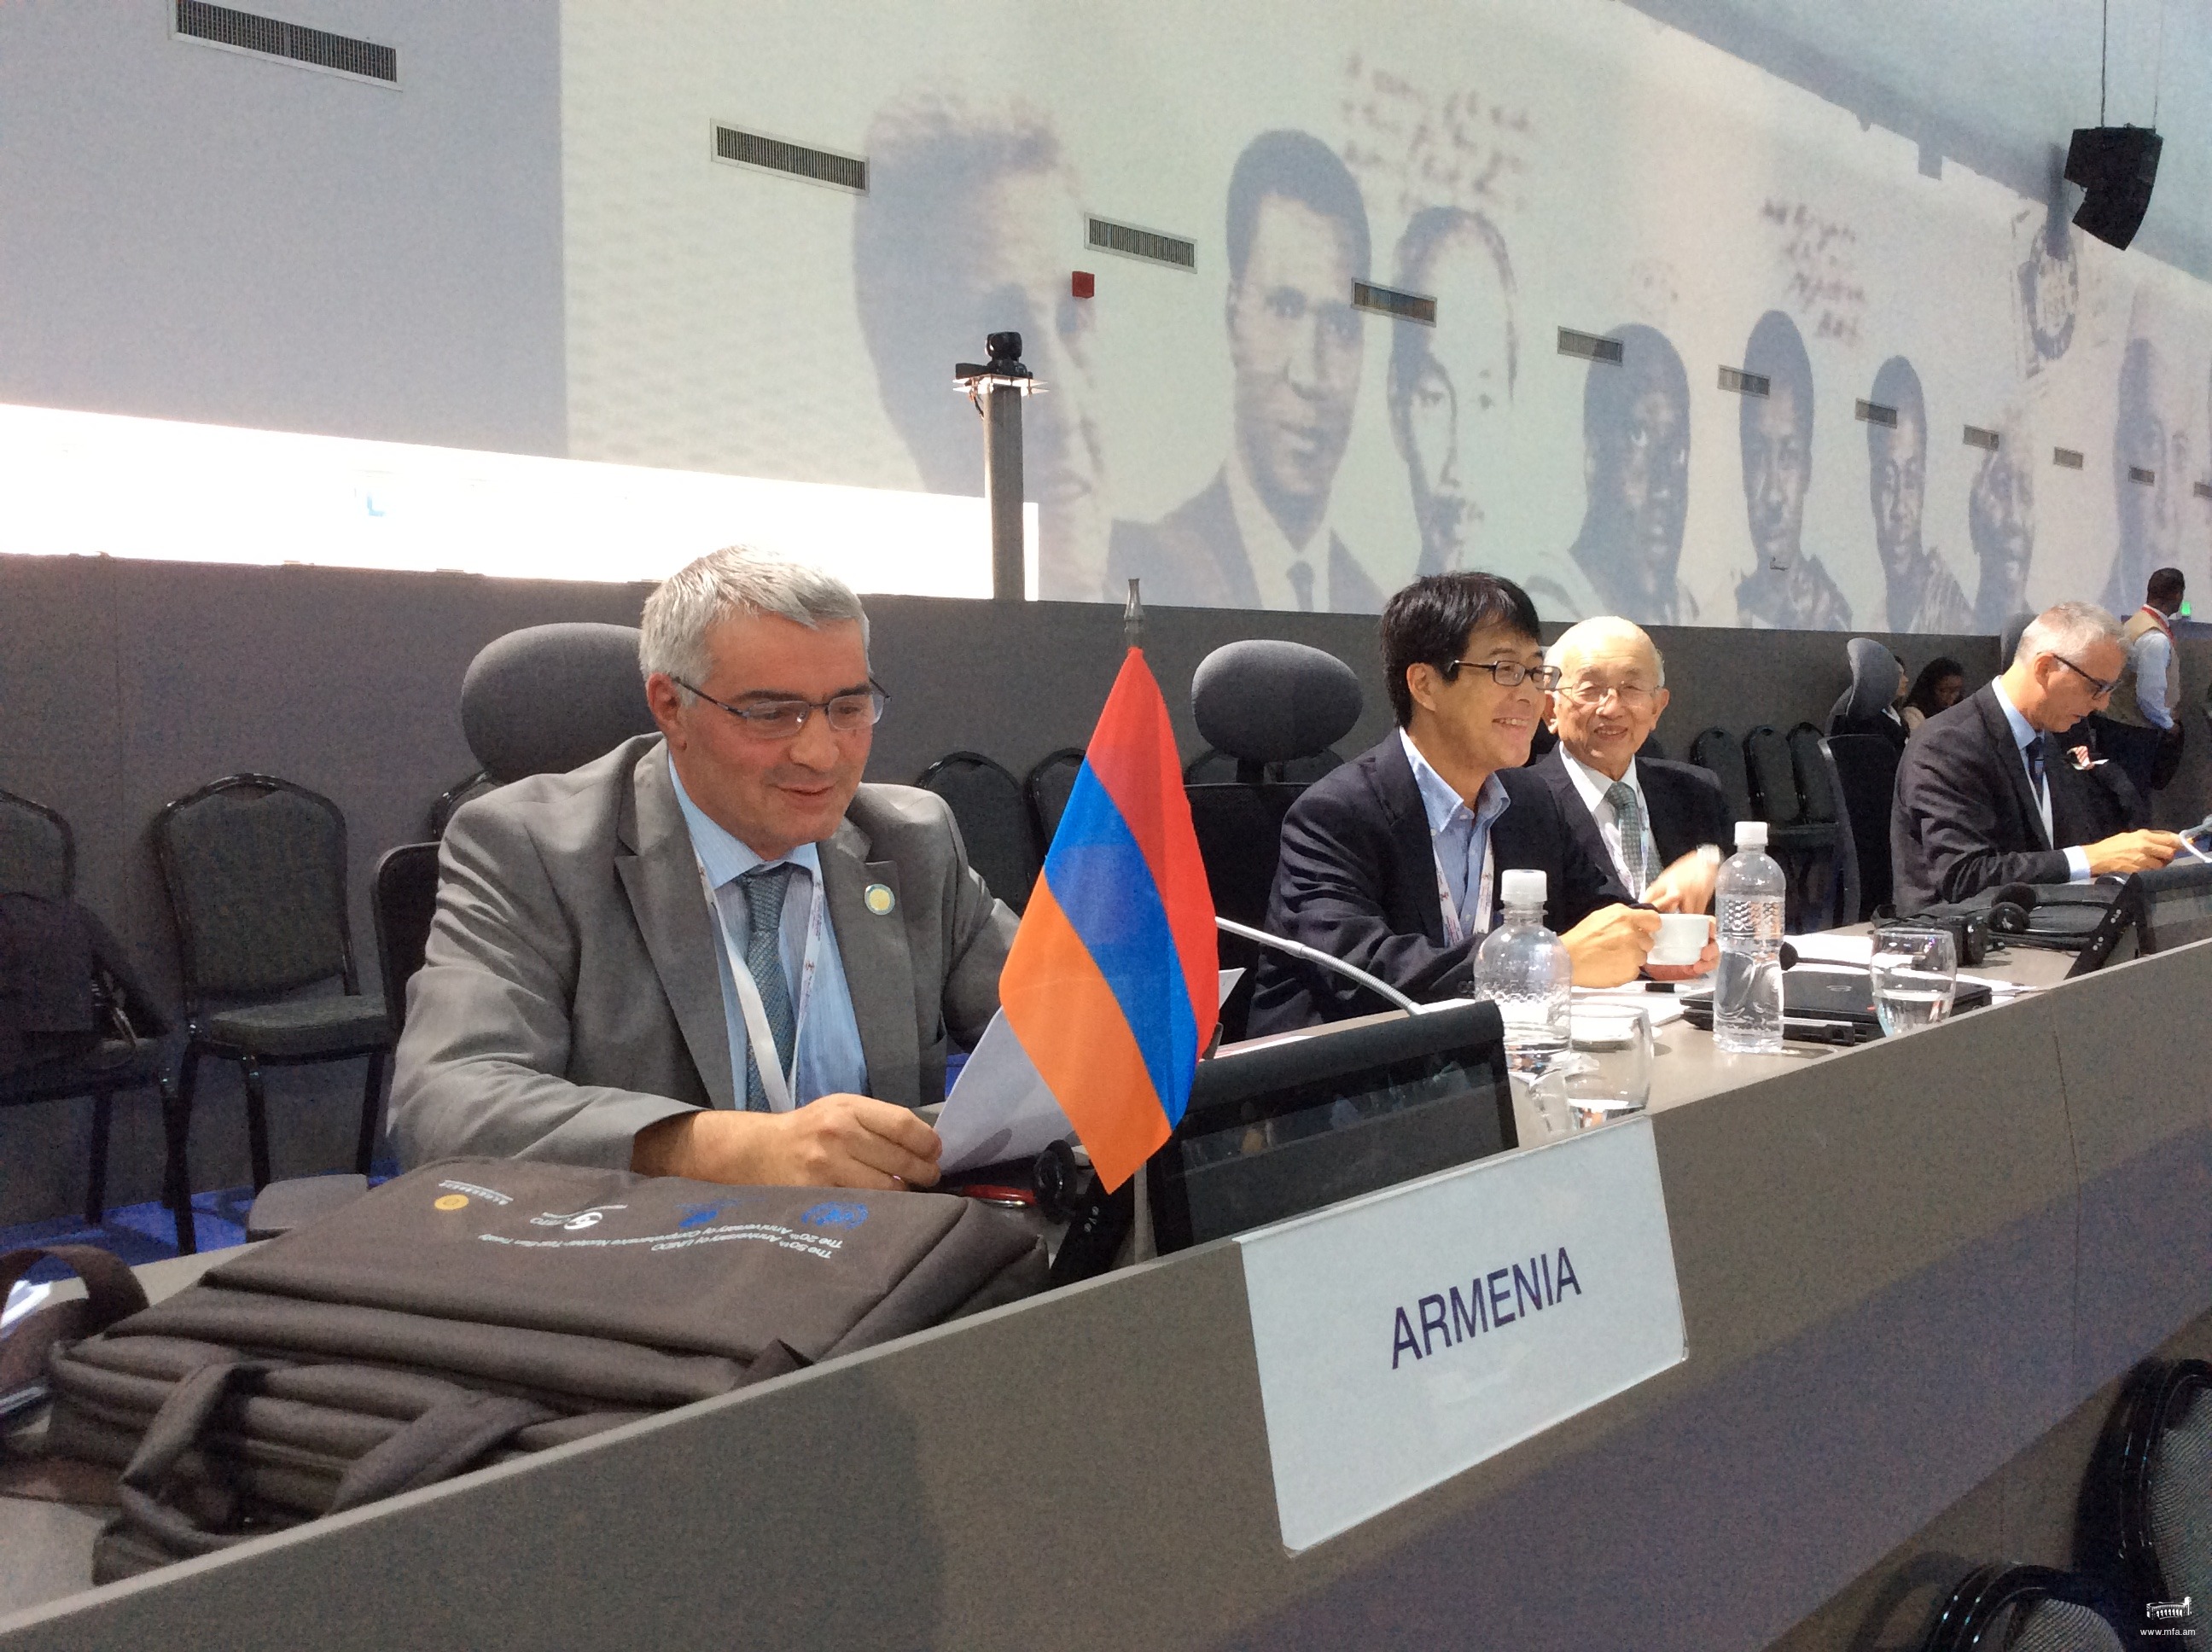 Deputy Foreign Minister Ashot Hovakimian participated in the Summit of the Non-Aligned Movement